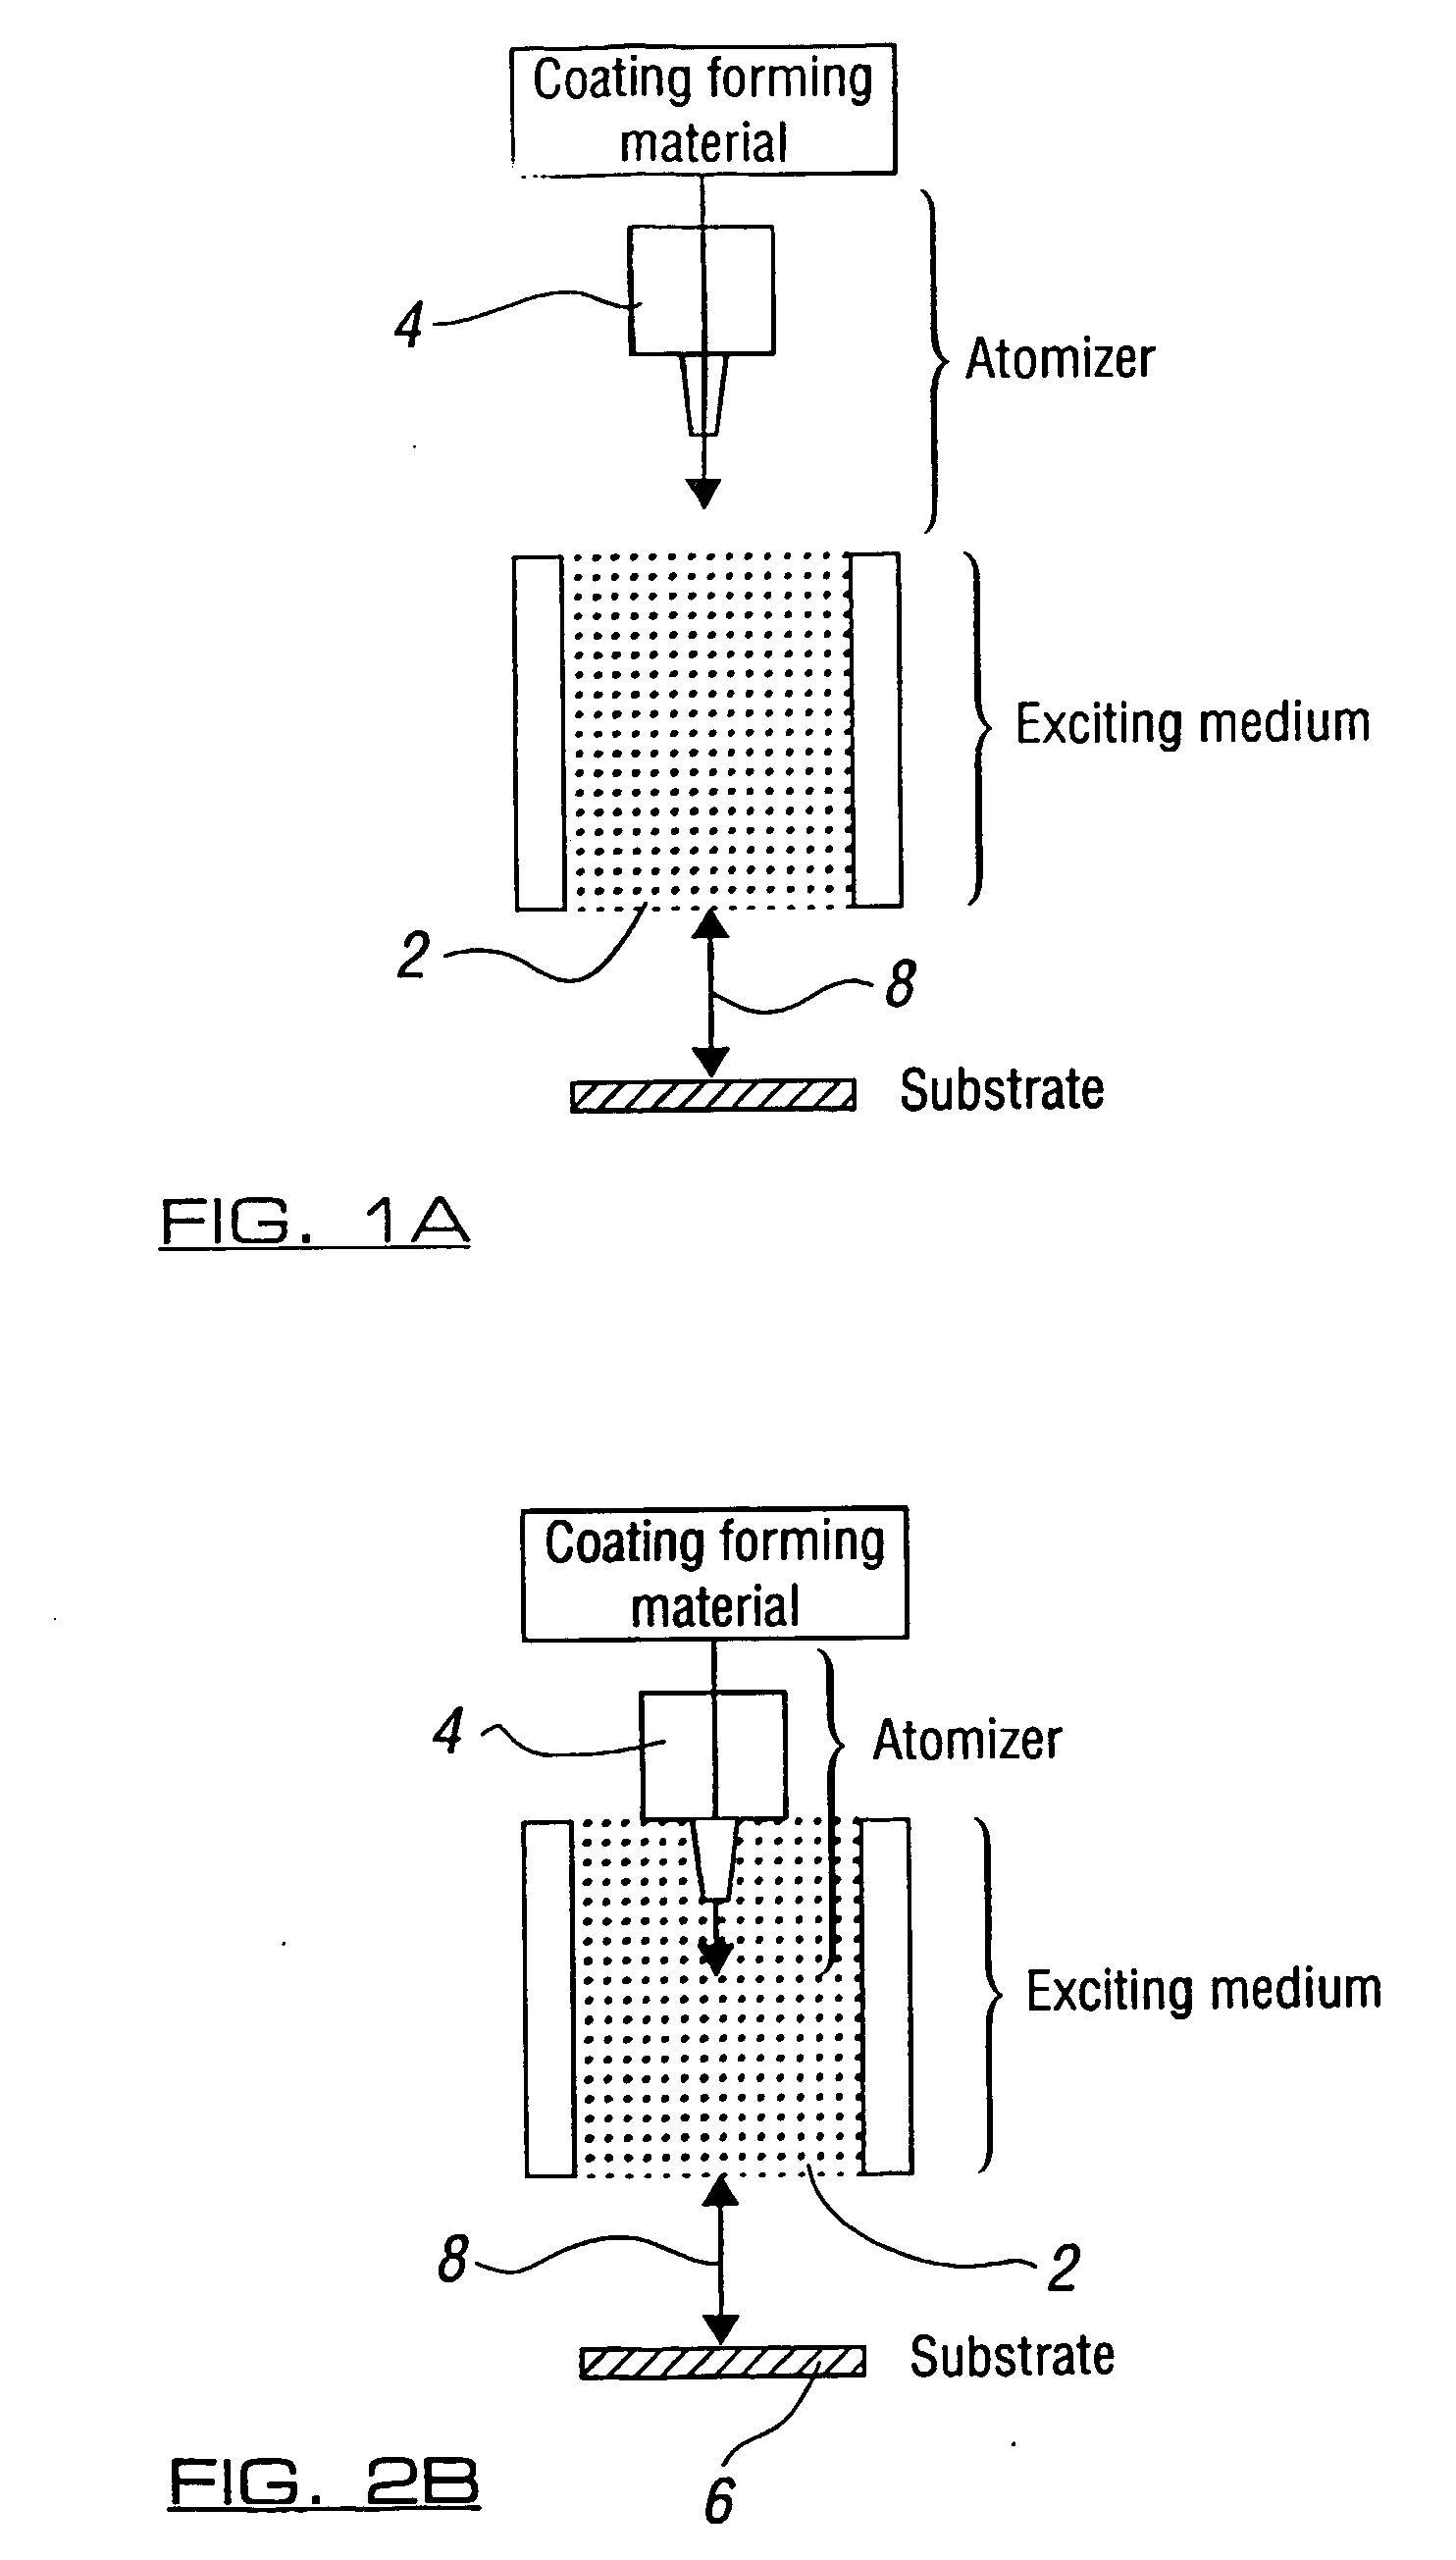 Atomisation of a precursor into an excitation medium for coating a remote substrate